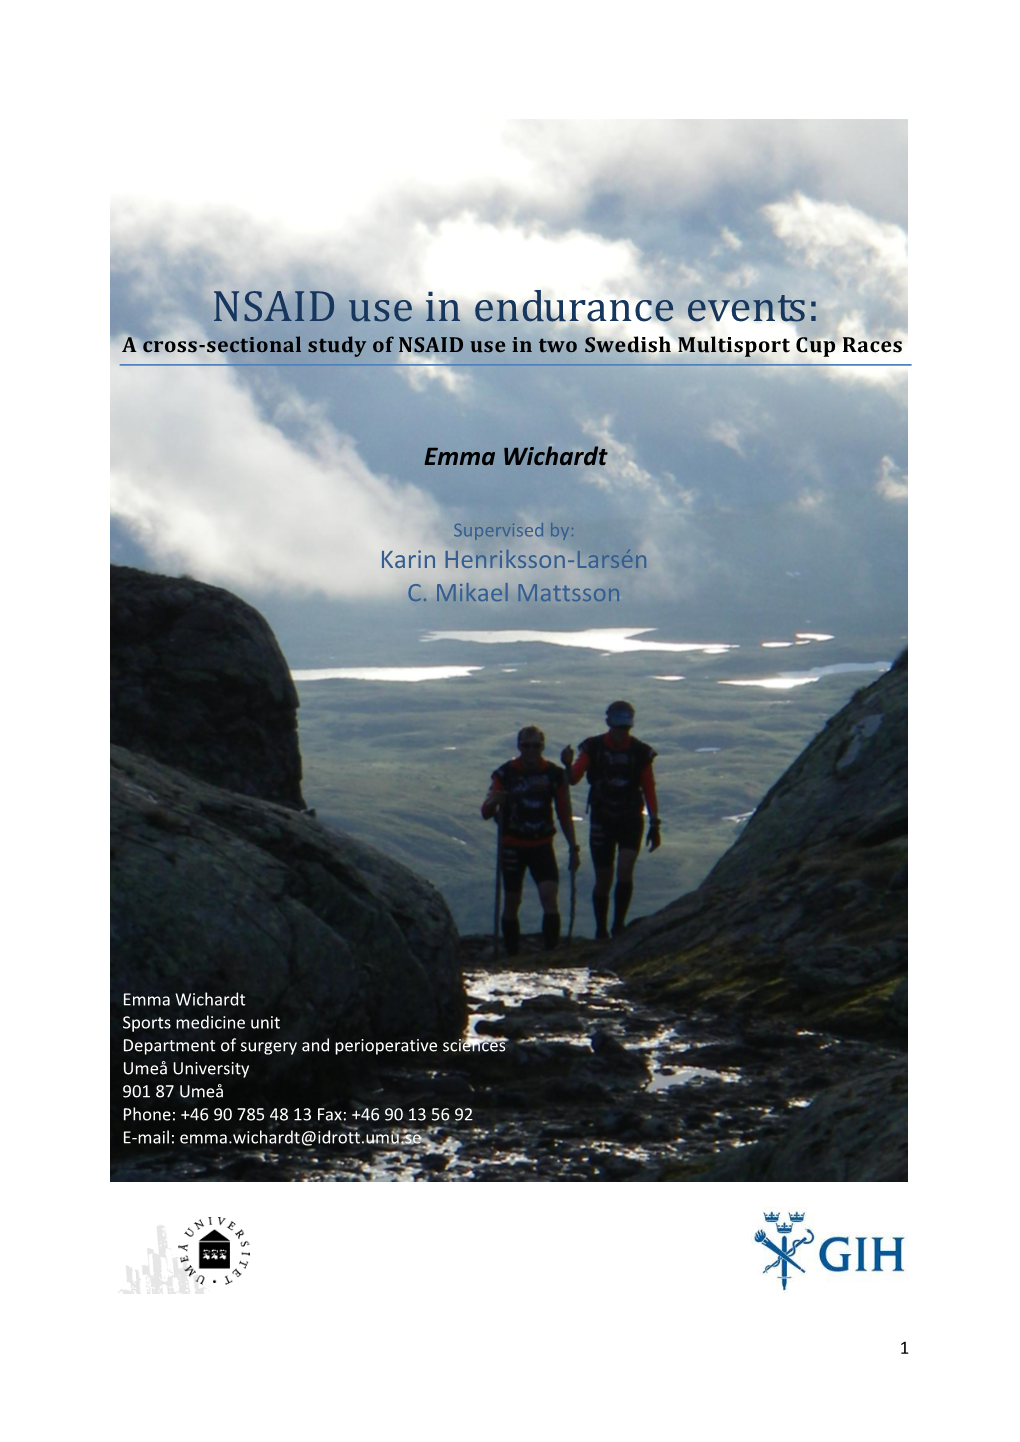 NSAID Use in Endurance Events: a Cross-Sectional Study of NSAID Use in Two Swedish Multisport Cup Races